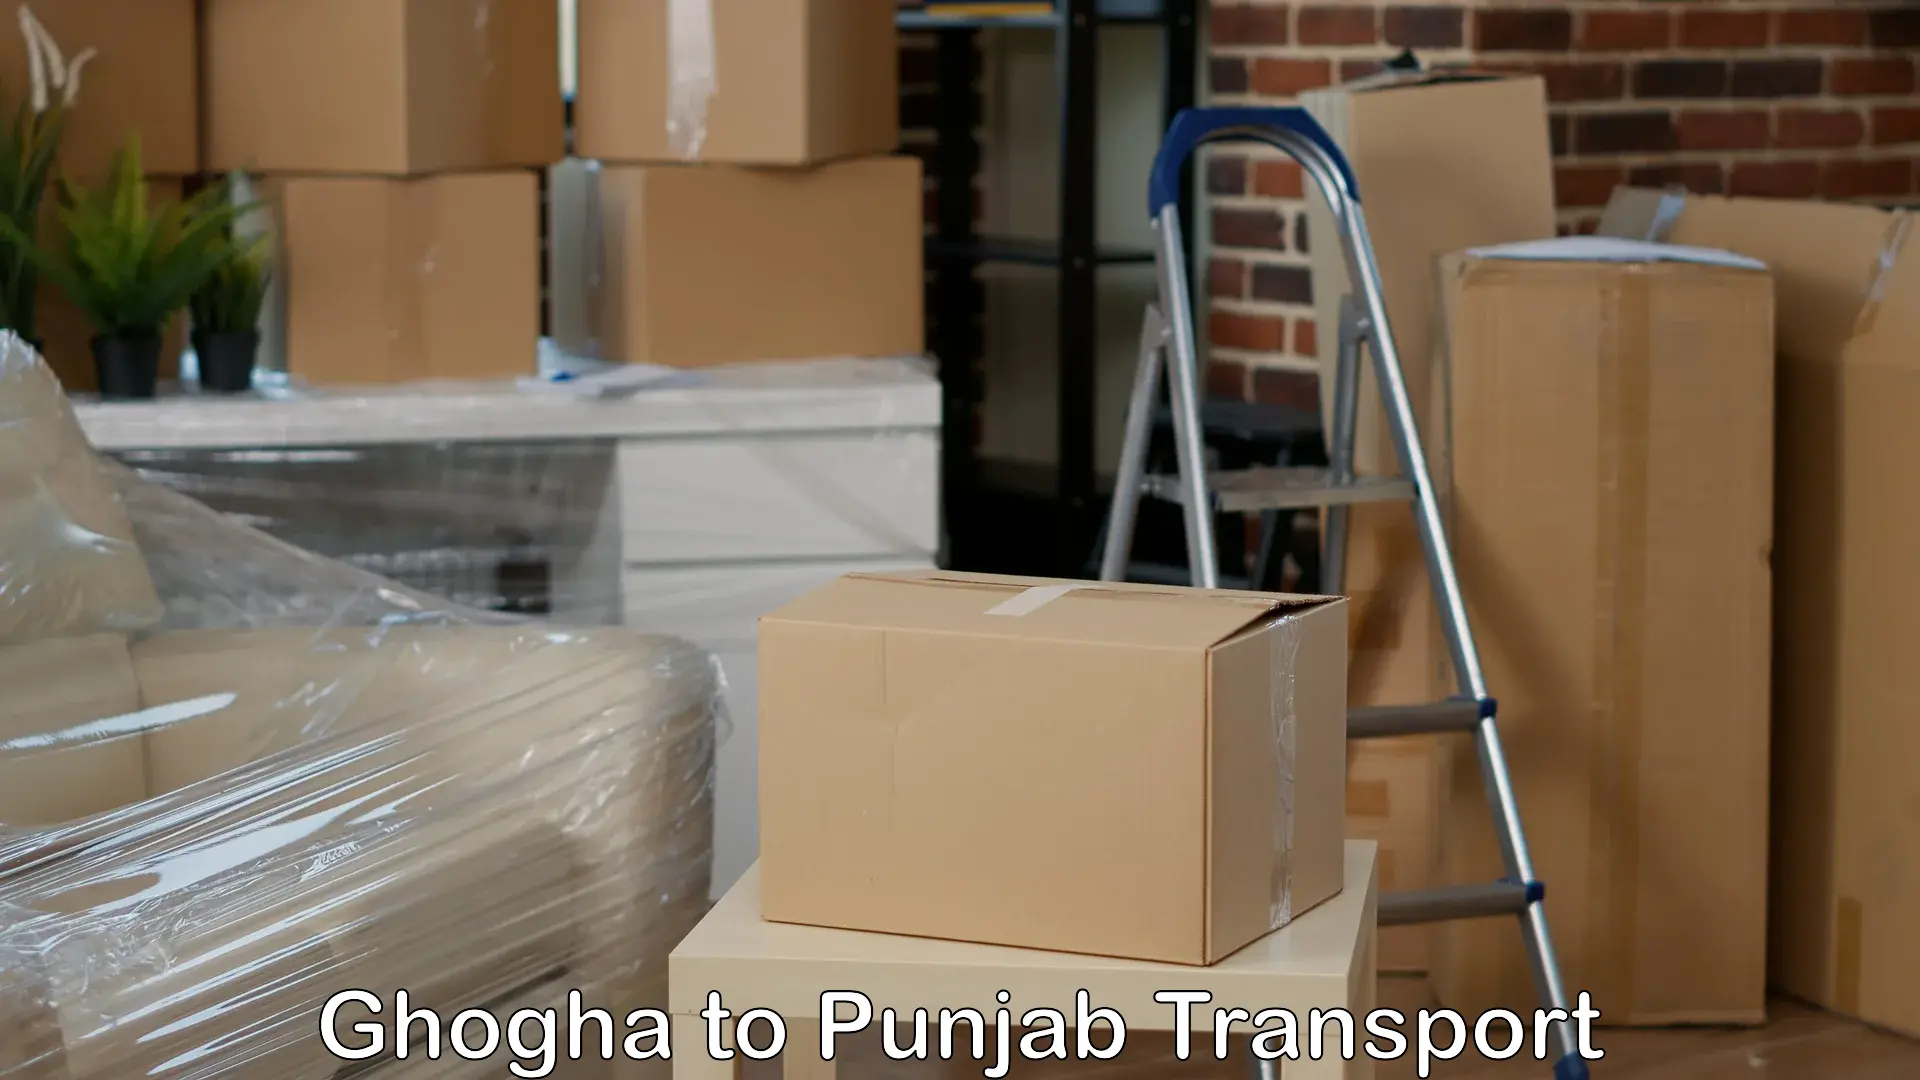 Daily transport service Ghogha to Punjab